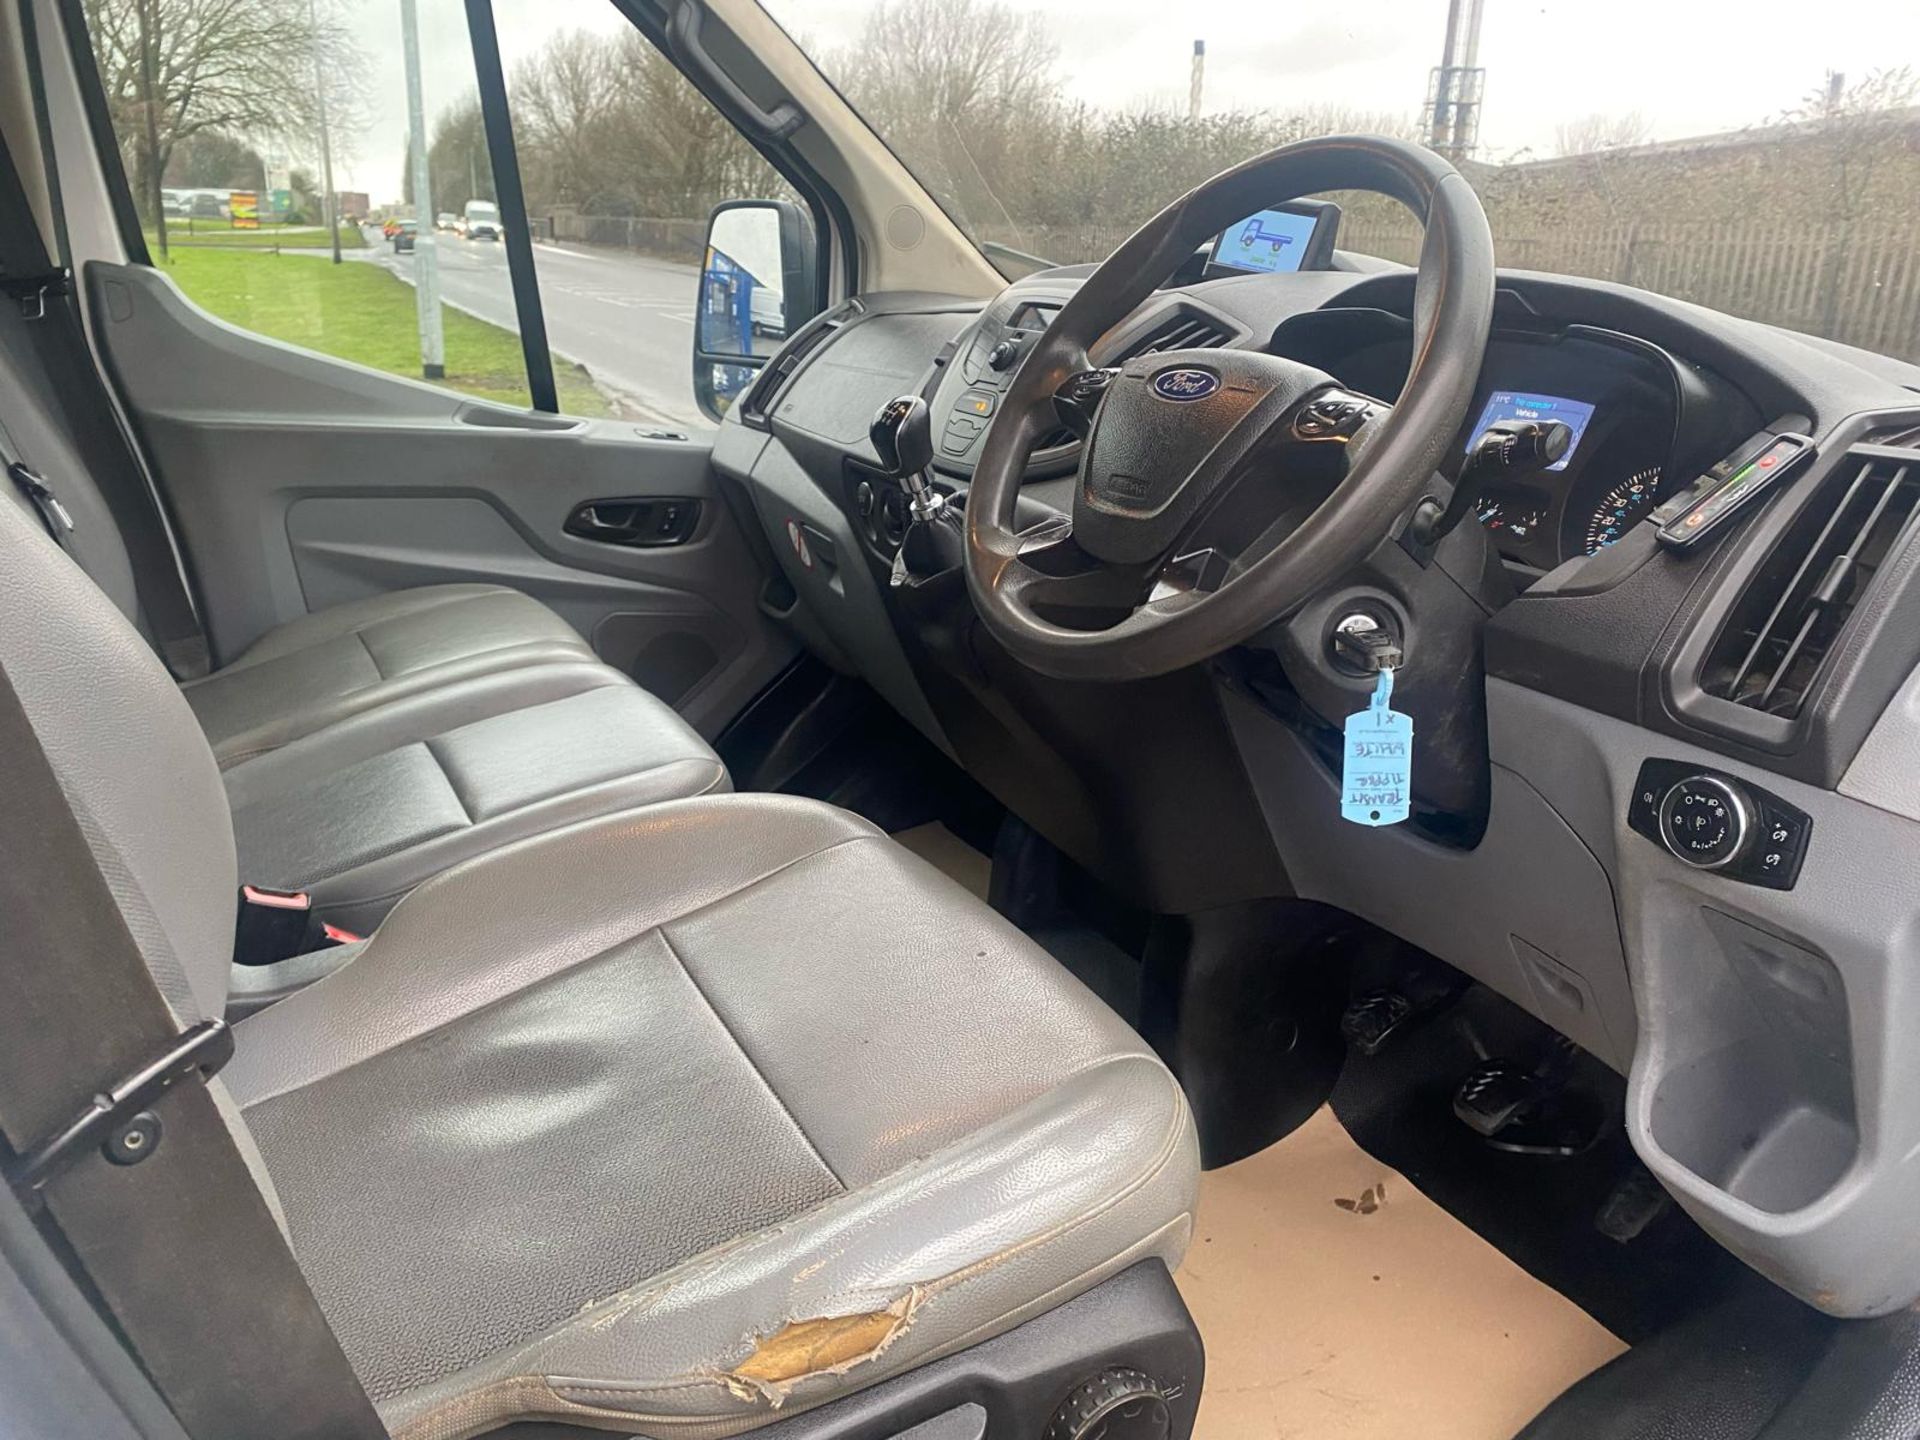 2018 18 FORD TRANSIT 470 TIPPER - 90K MILES - 4.7 TON GROSS - 3 SEATS - RARE TIPPER - TOWBAR - Image 13 of 15